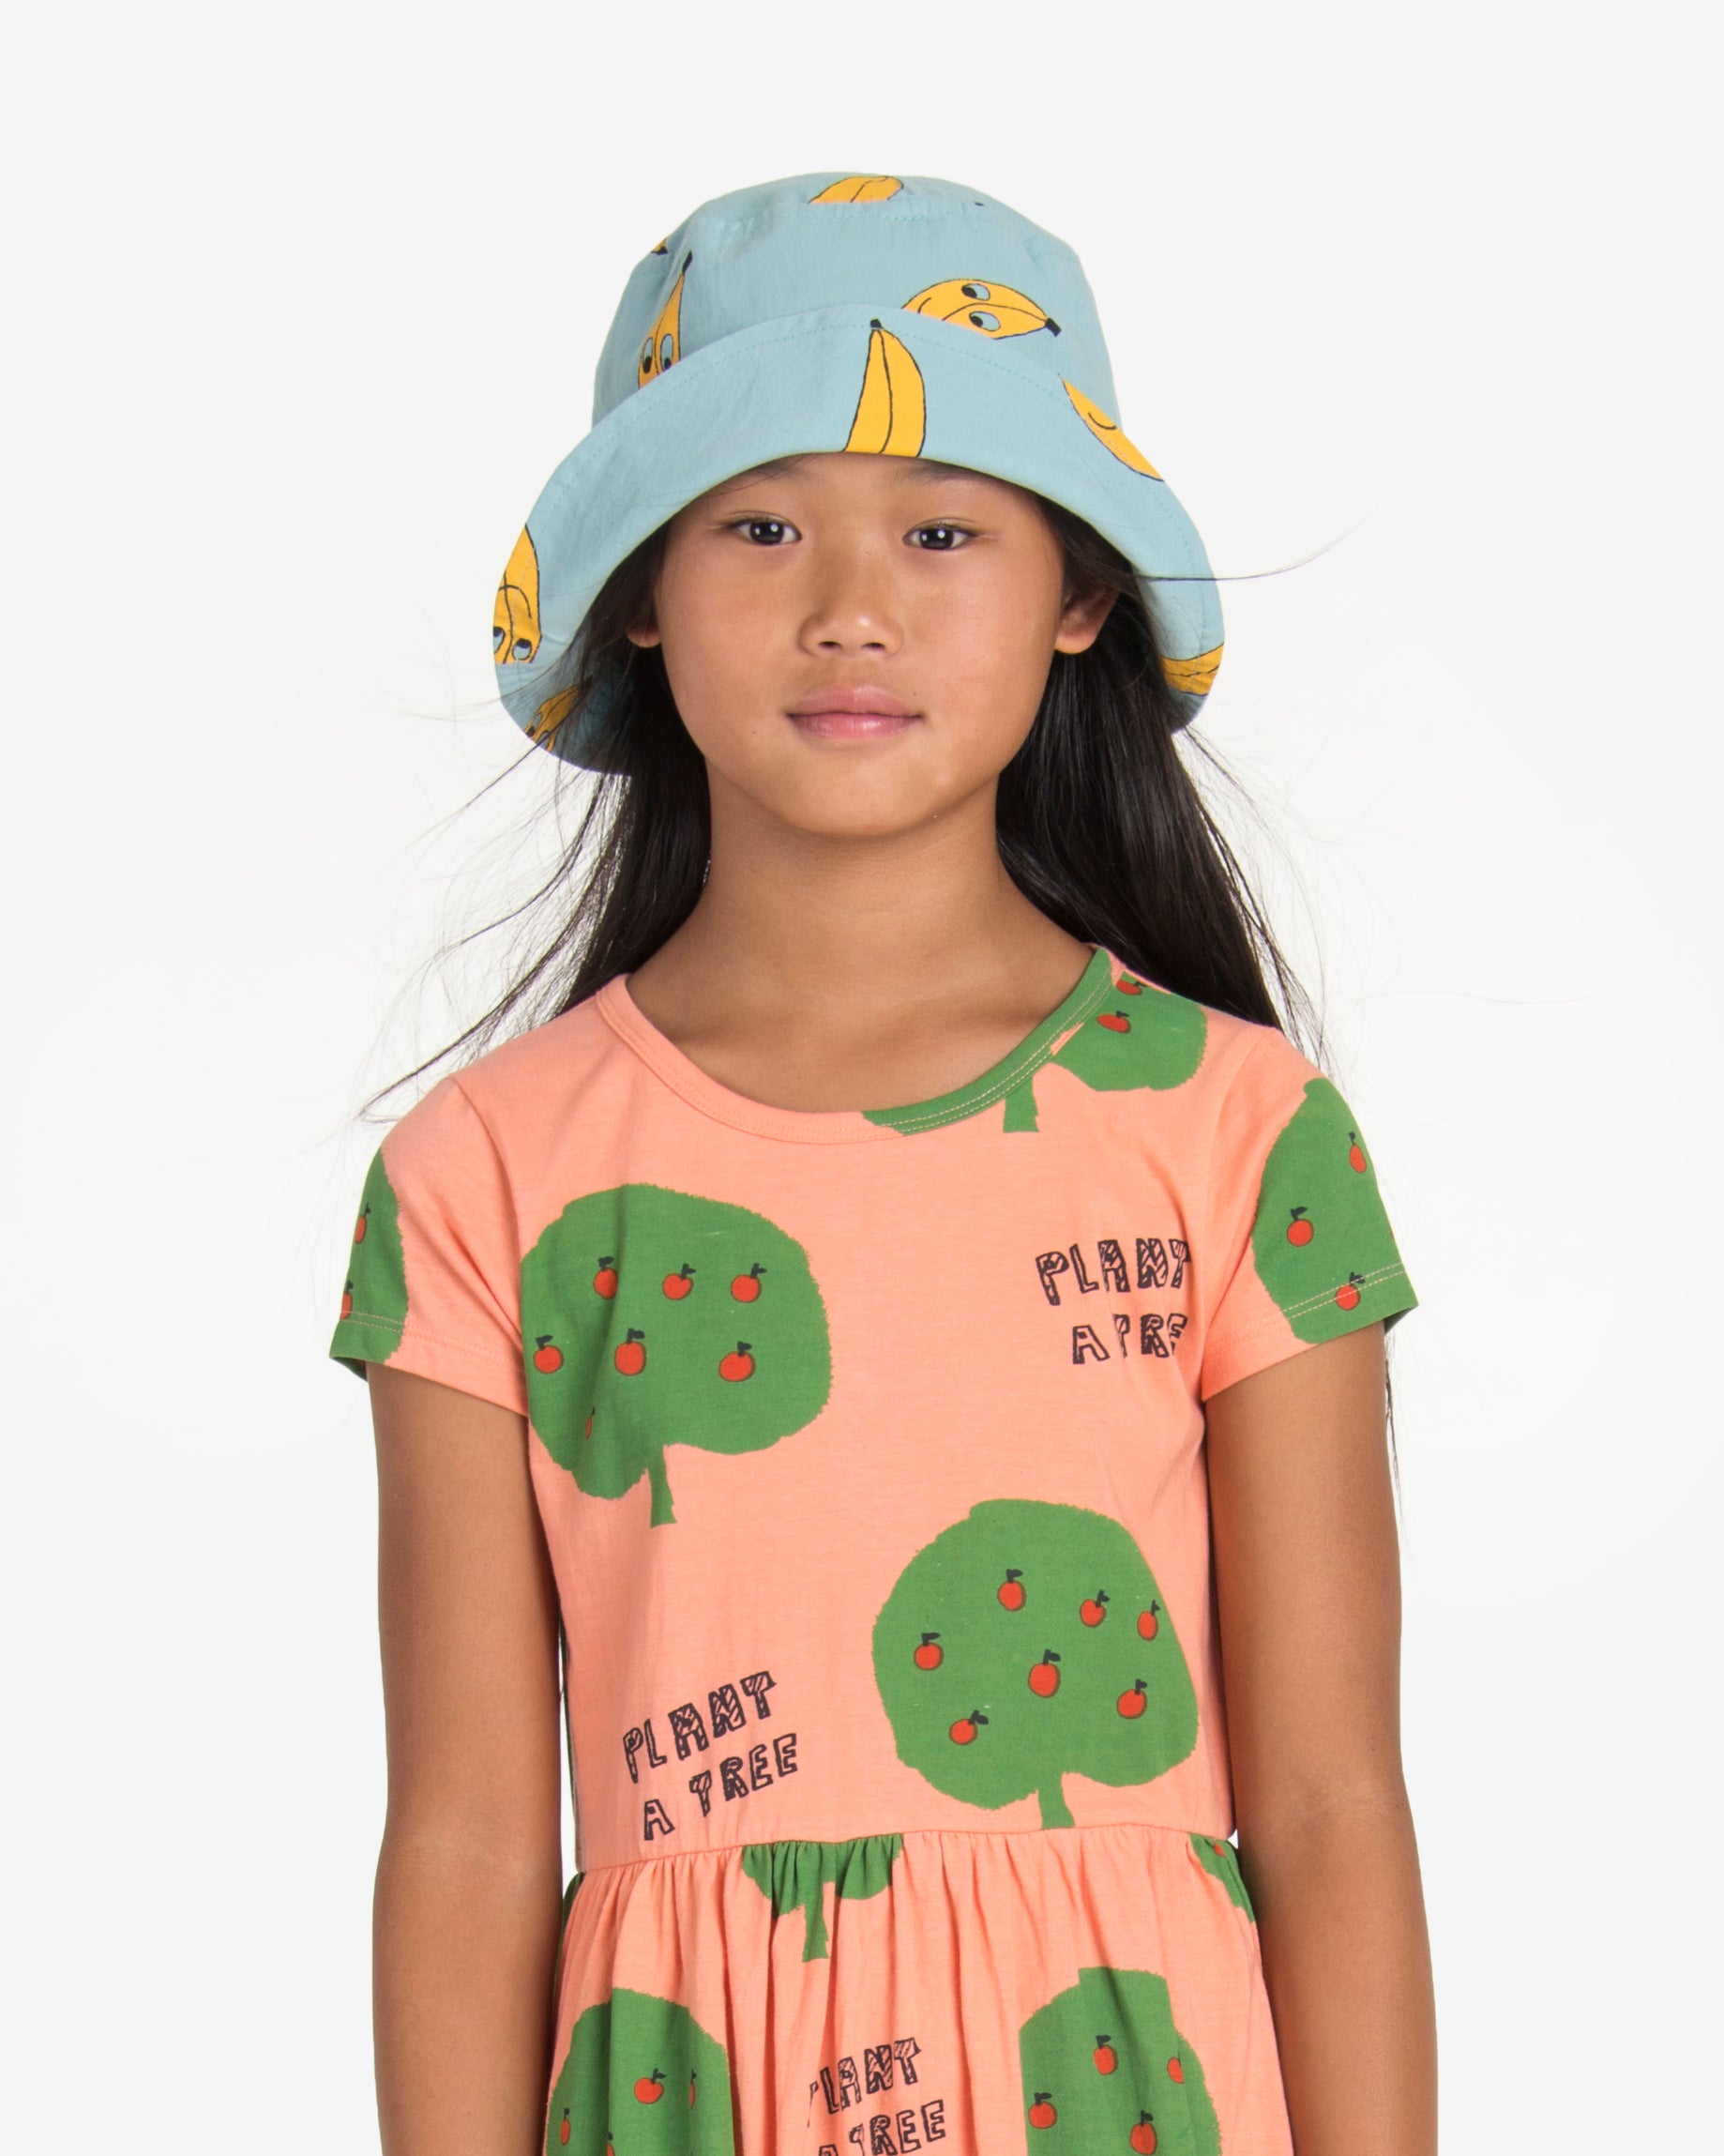 Model wearing a bucket style hat in light green with yellow banana print. Made by Nadadelazos.